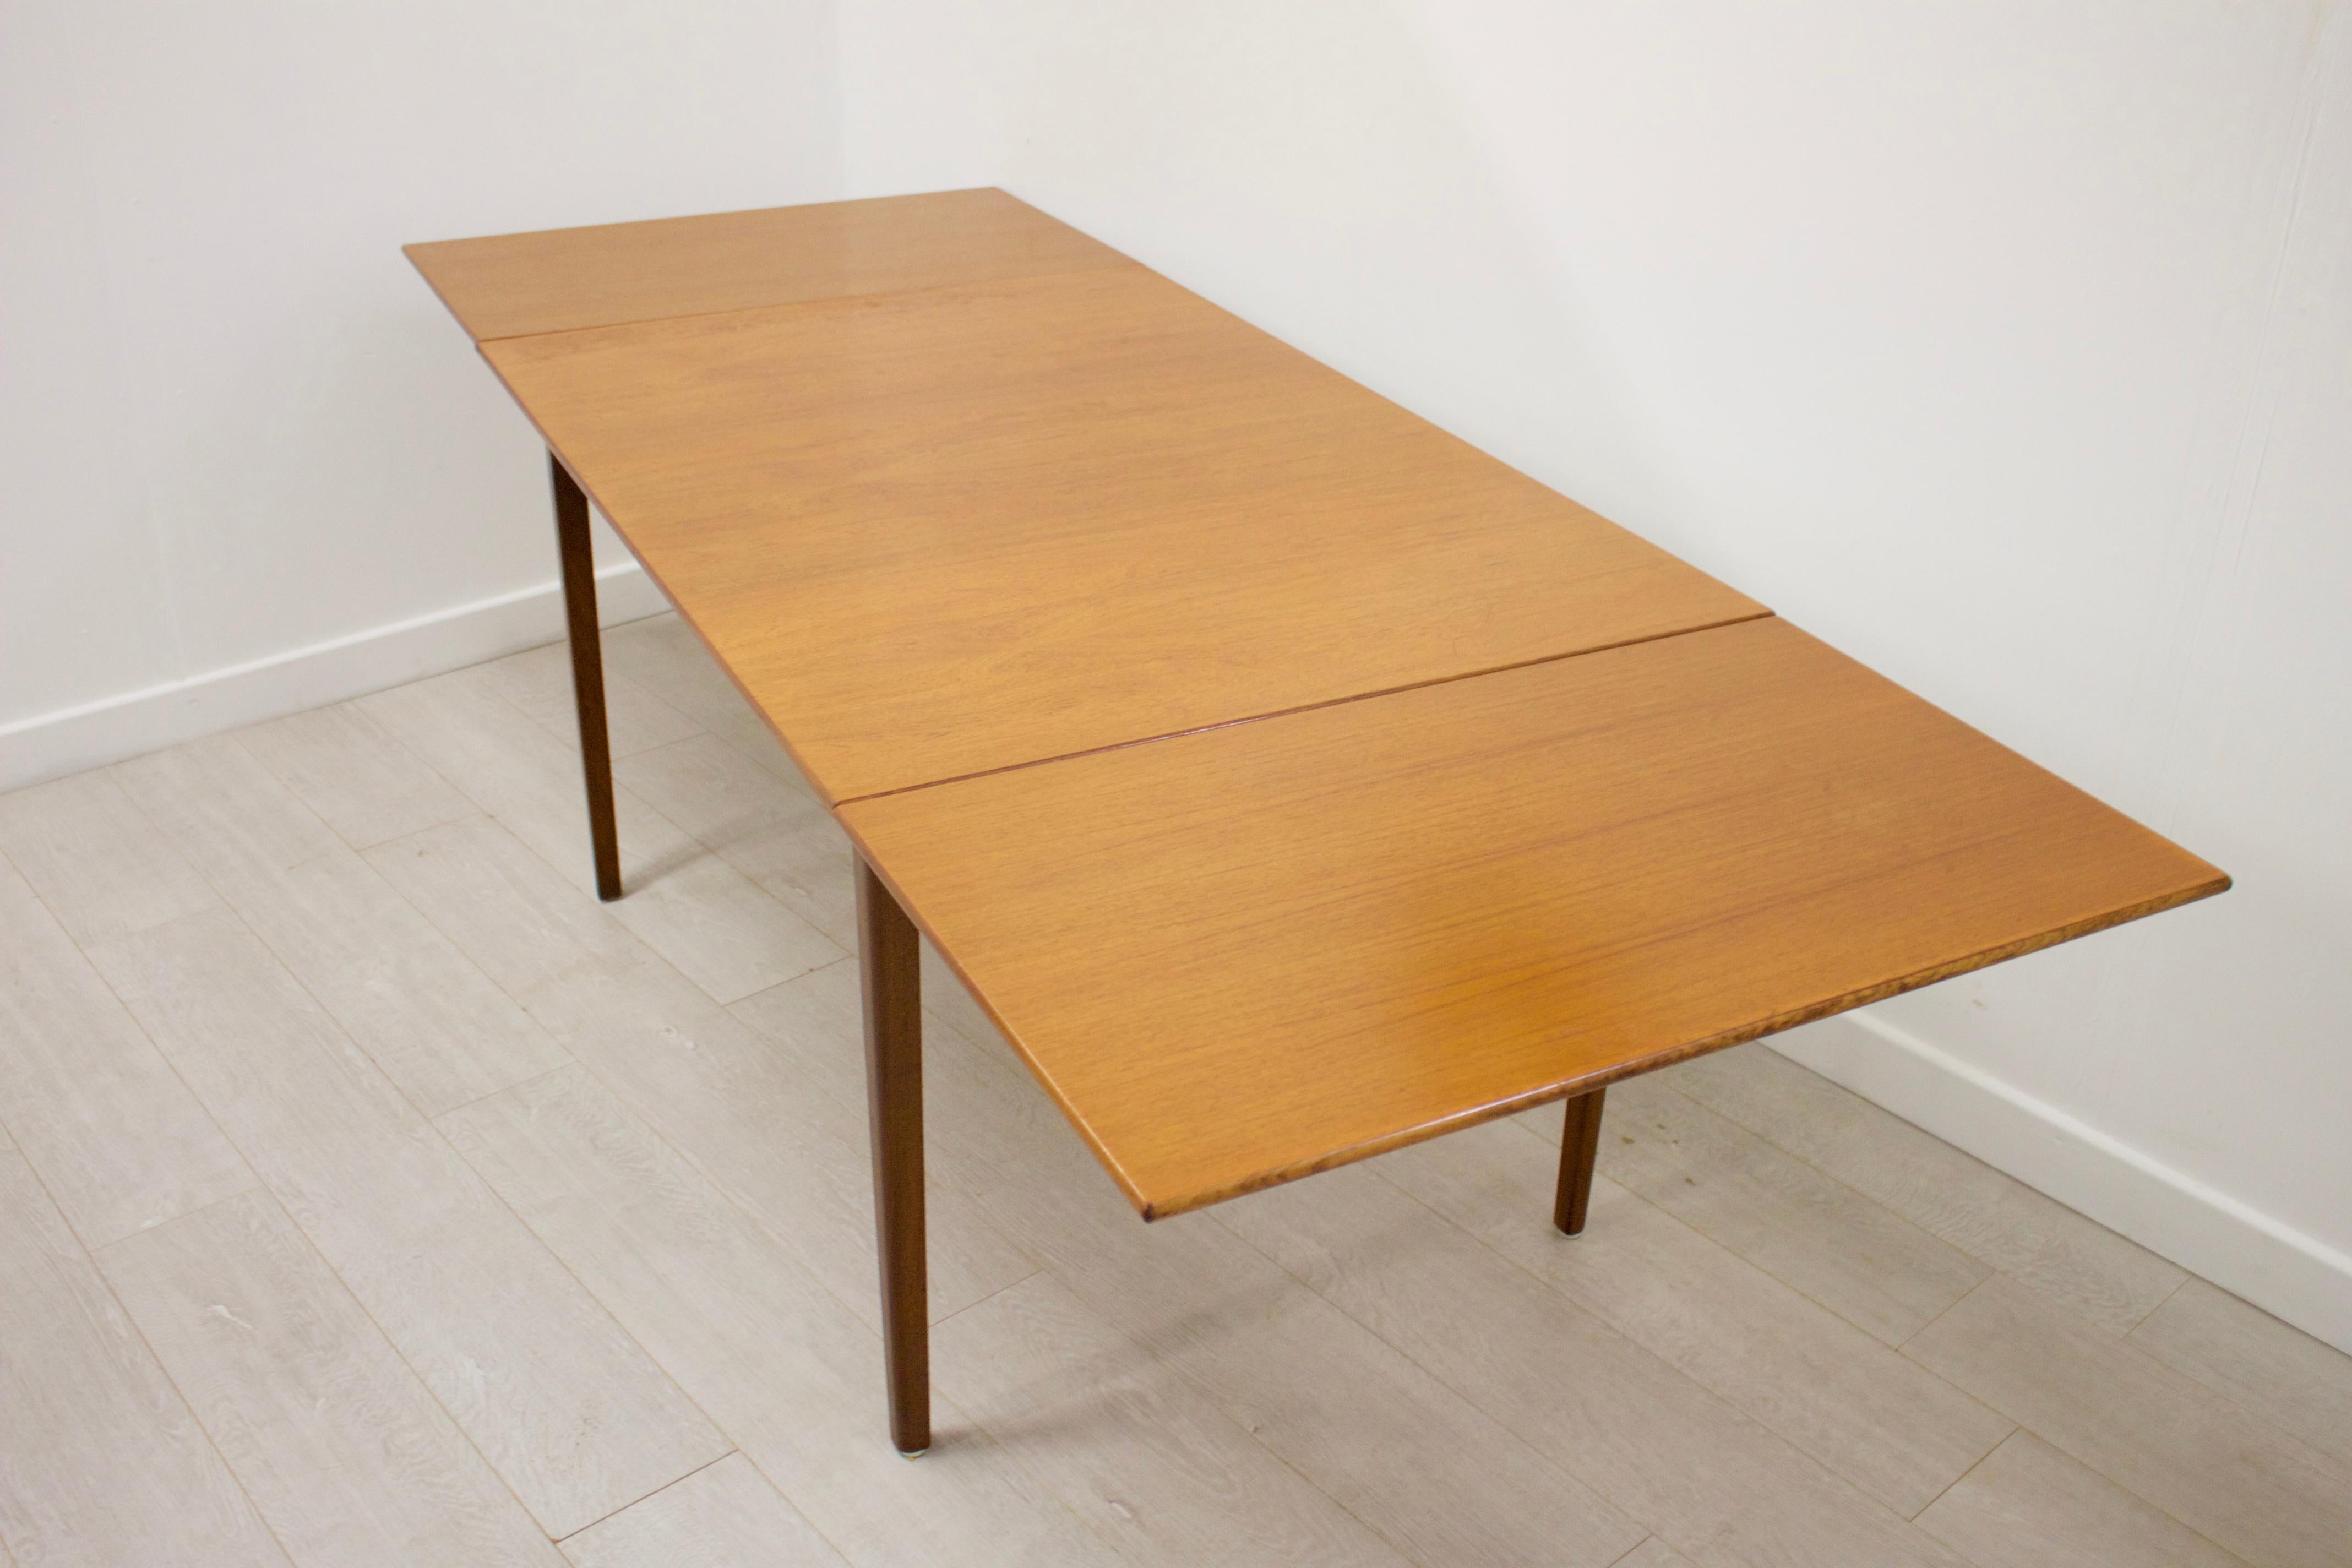 Midcentury Danish Teak Extending Dining Table, 1960s In Good Condition For Sale In South Shields, Tyne and Wear